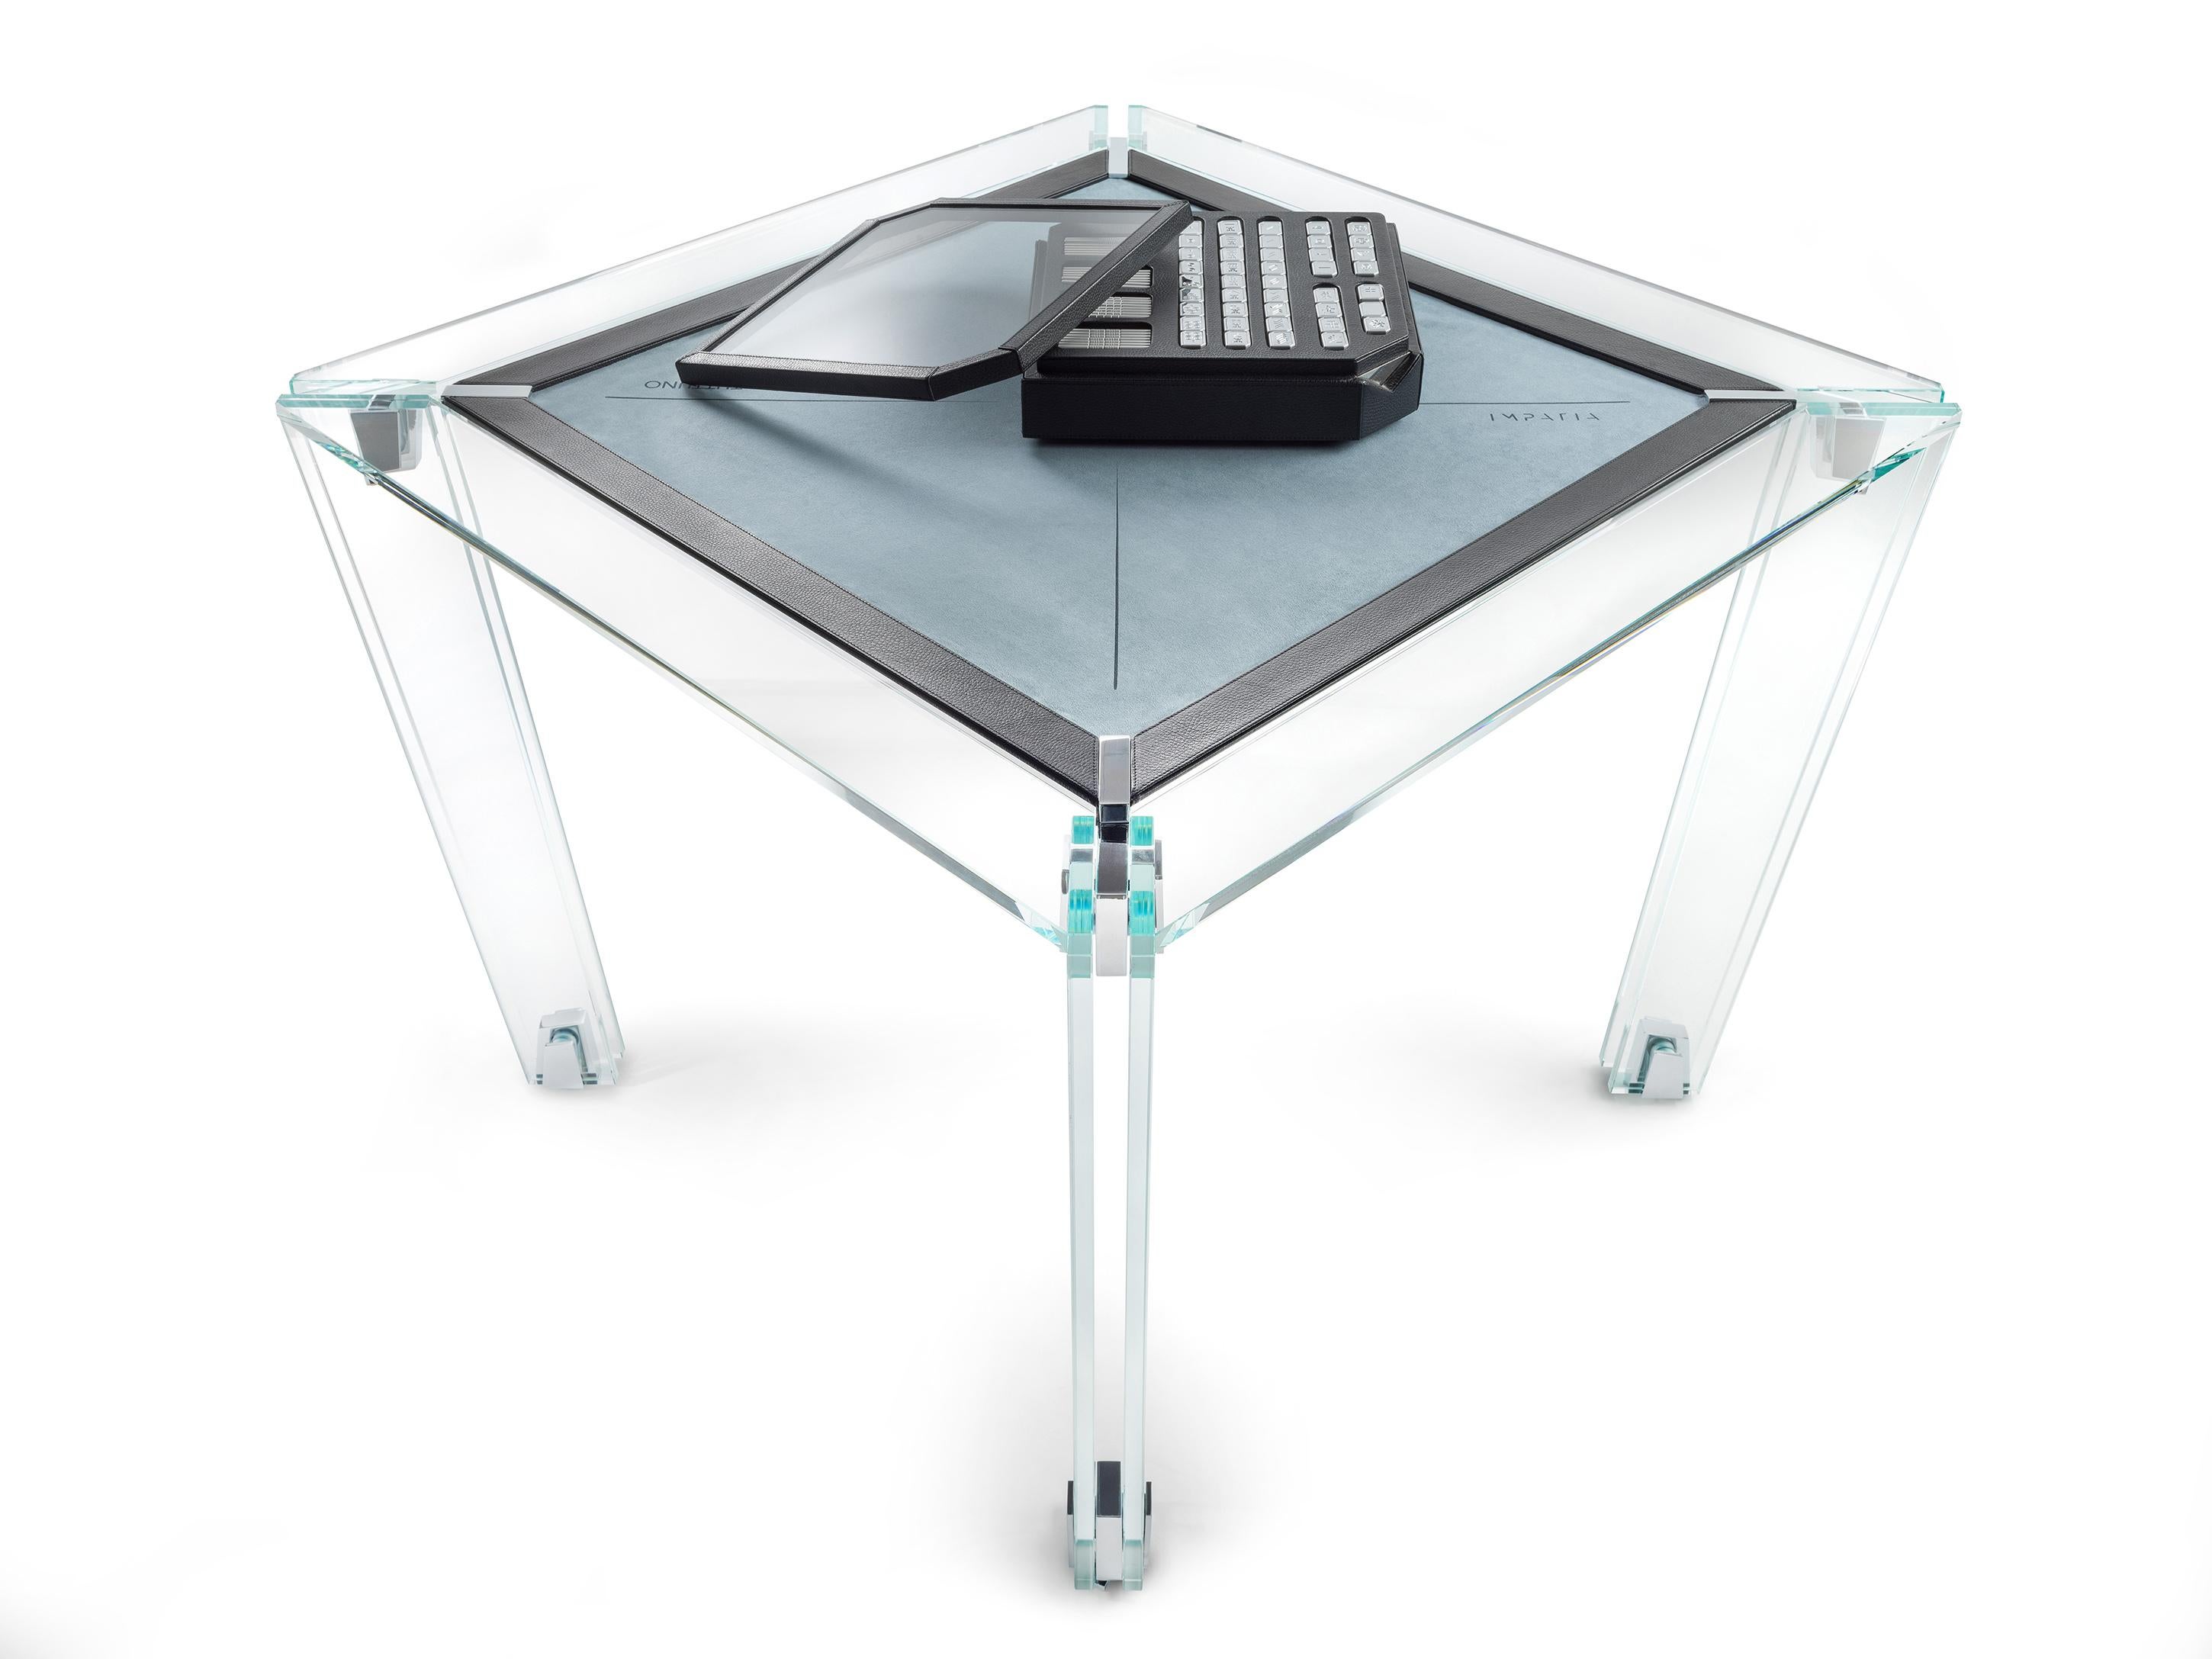 The Tuttuno leather edition Mahjong game table is designed to accommodate two to four players for a game of Mahjong or even perhaps cards. The minimalistic design gives off the unique impression that the table is floating.

This Tuttuno table